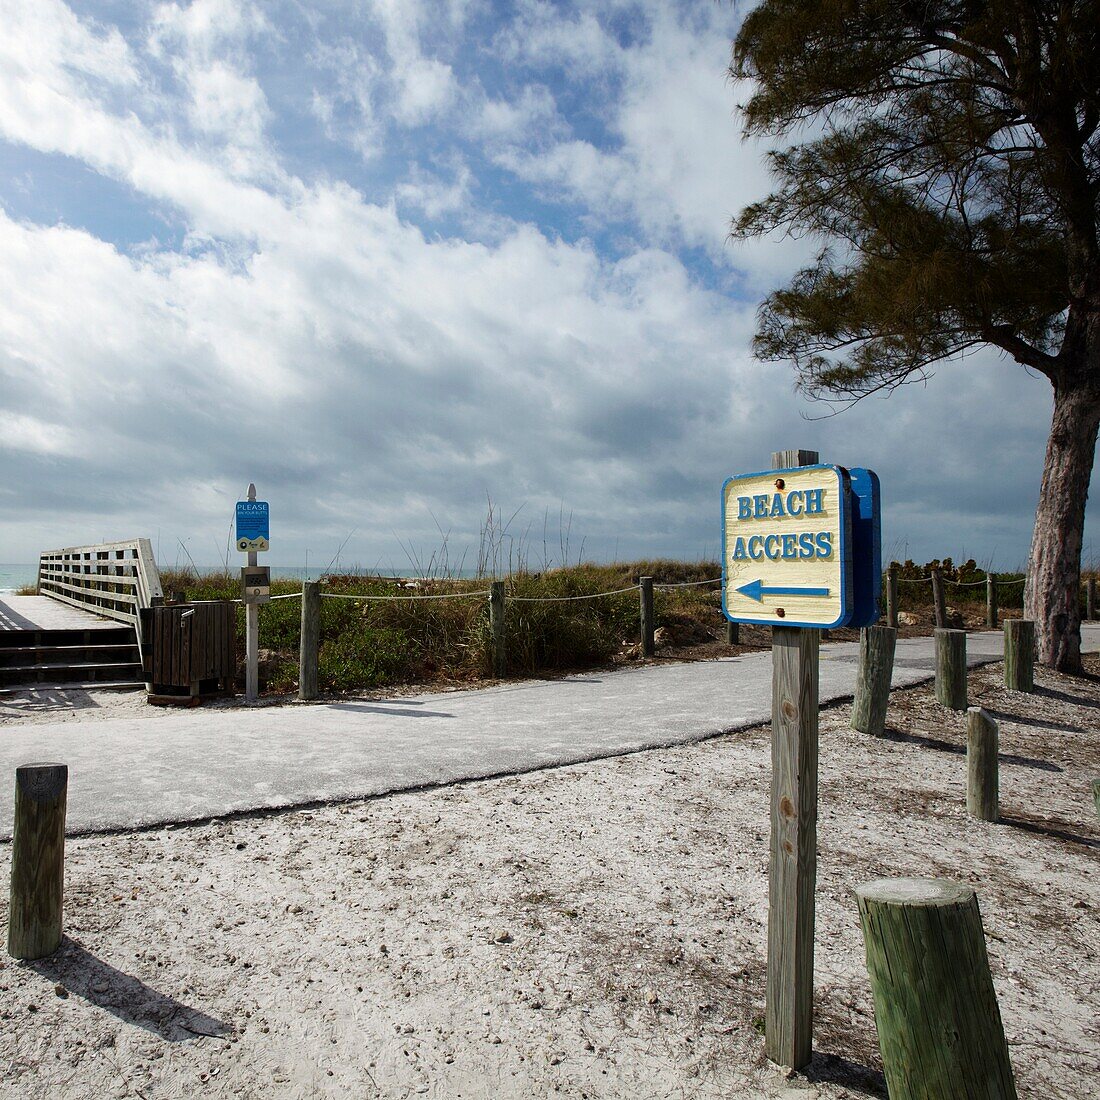 Sign pointing to beach access in Florida